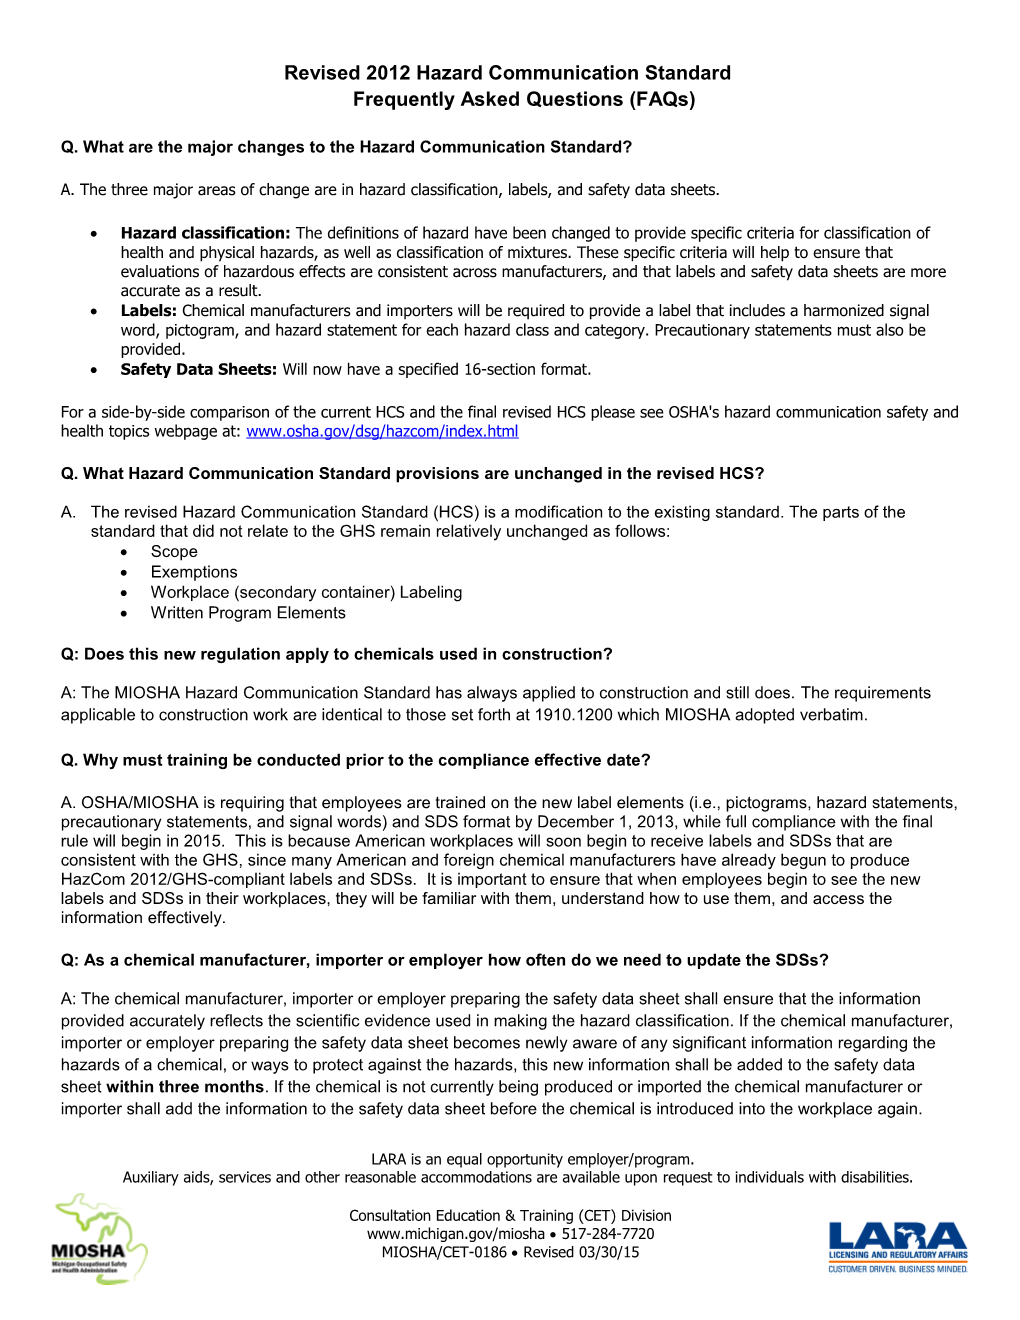 Revised 2012 Hazard Communication Standard Frequently Asked Questions (FAQ's)